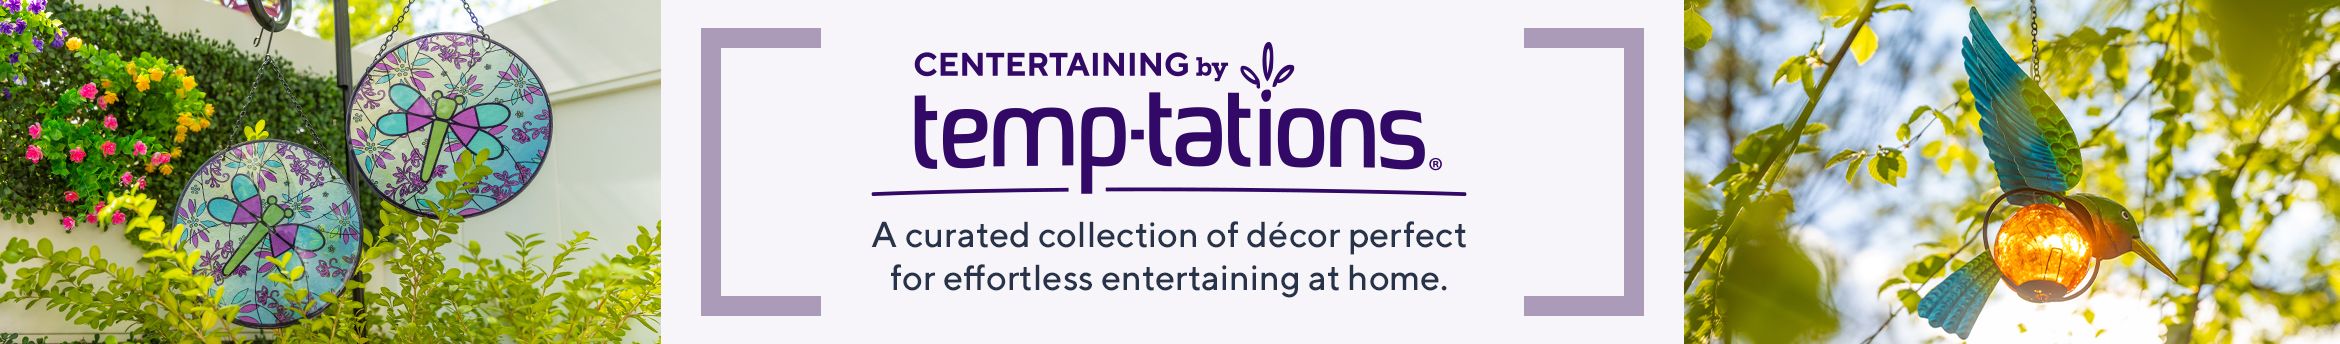 Centertaining by Temp-tations®. A curated collection of décor perfect for effortless entertaining at home.